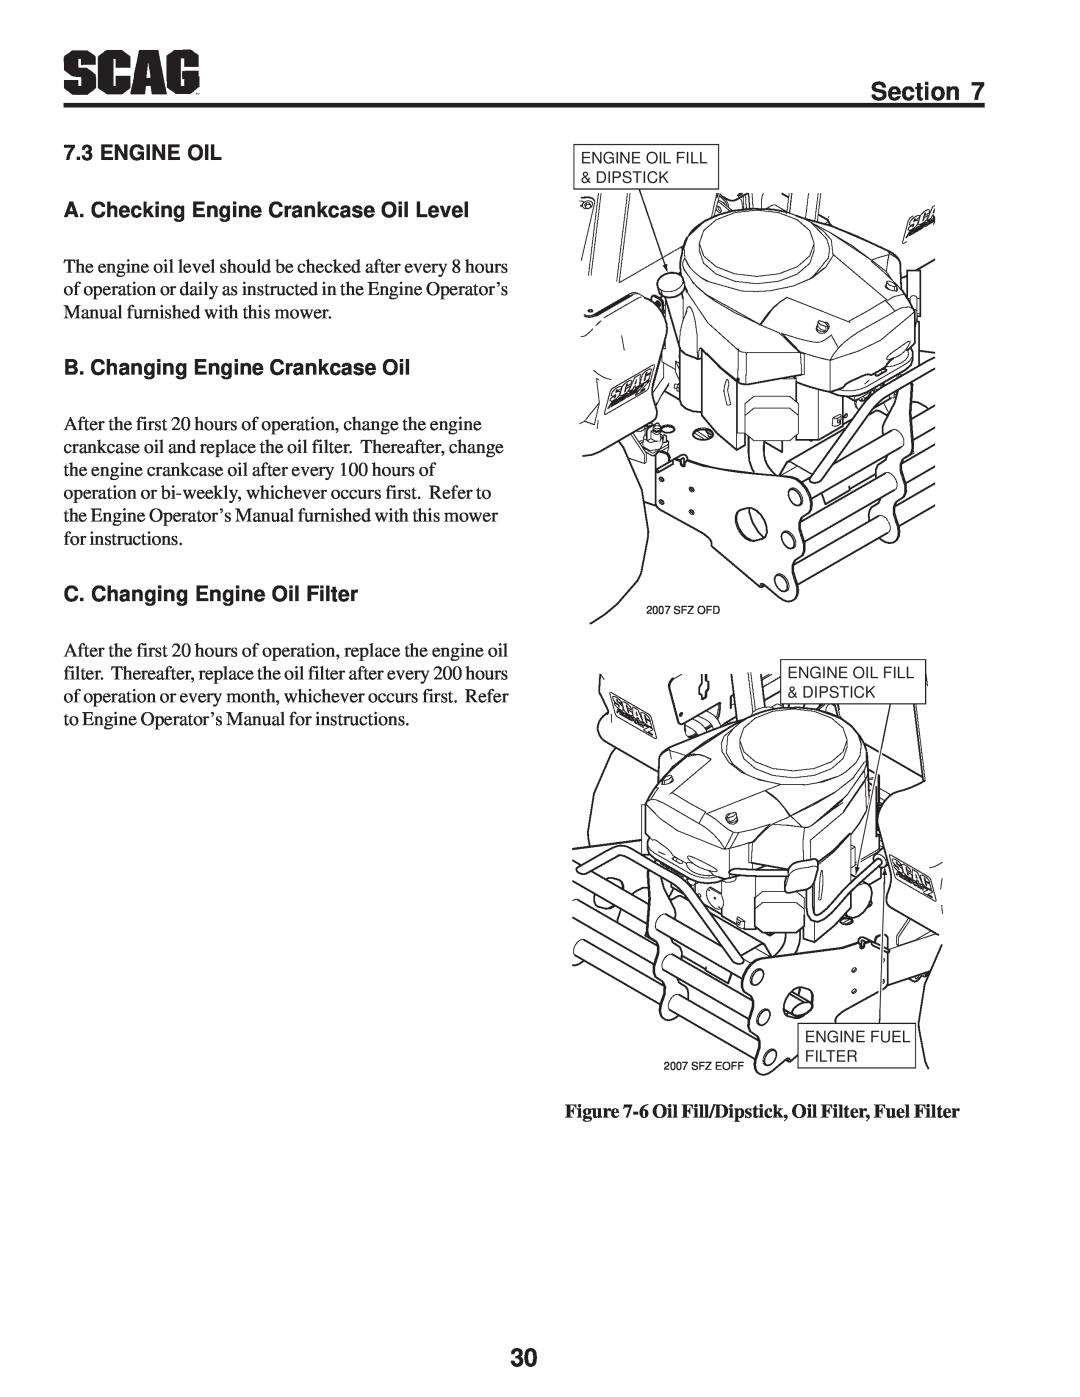 Scag Power Equipment SFZ manual ENGINE OIL A. Checking Engine Crankcase Oil Level, B. Changing Engine Crankcase Oil 